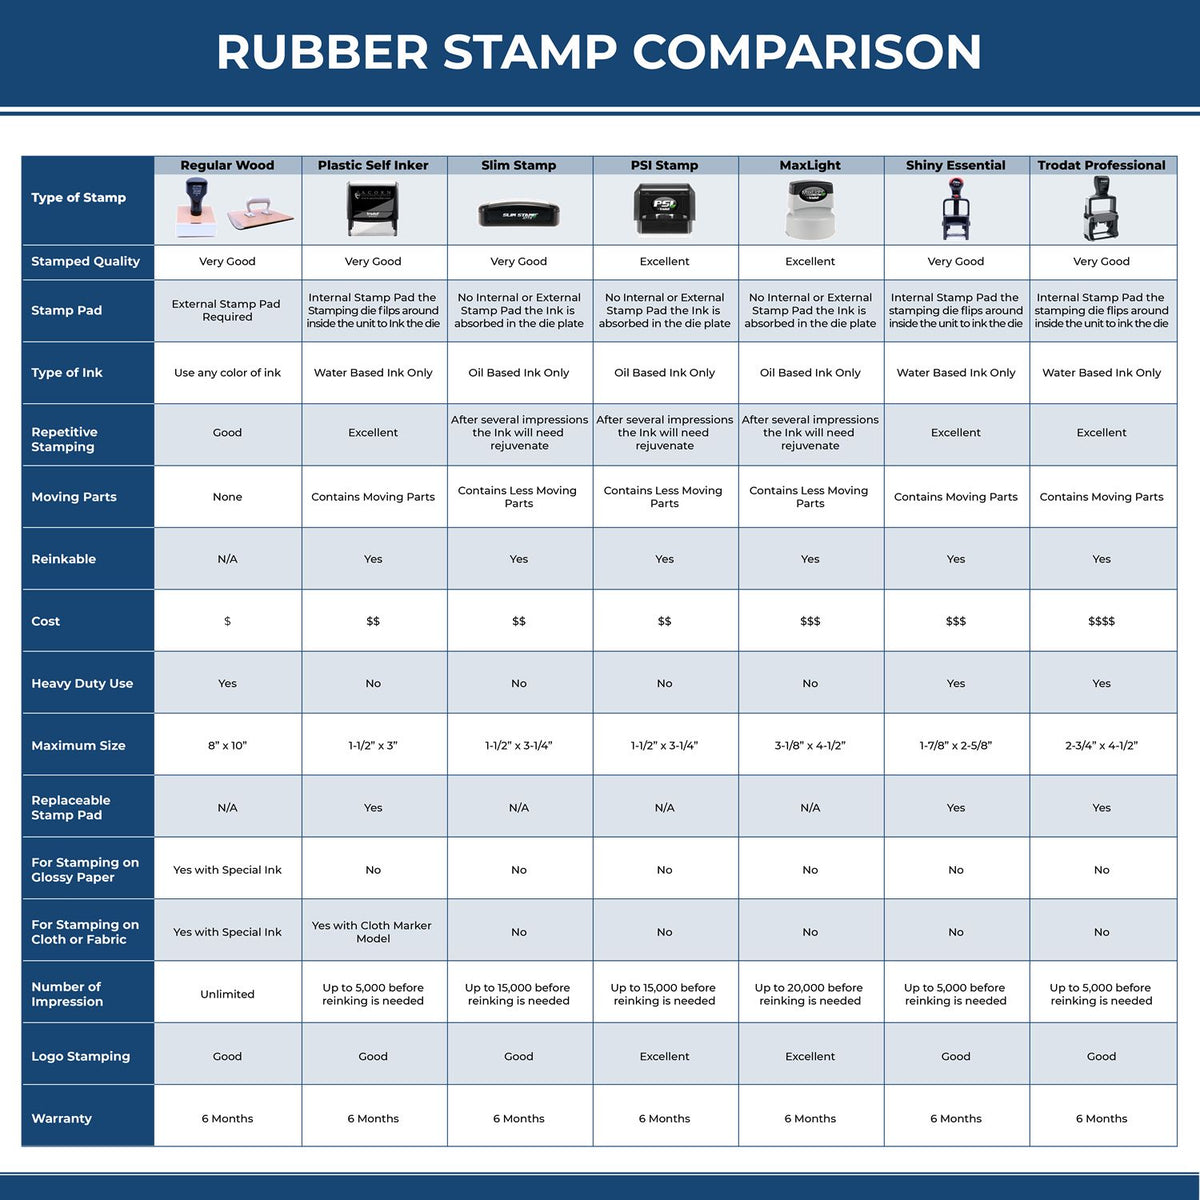 Large Self Inking Cash Only Stamp 4541S Rubber Stamp Comparison